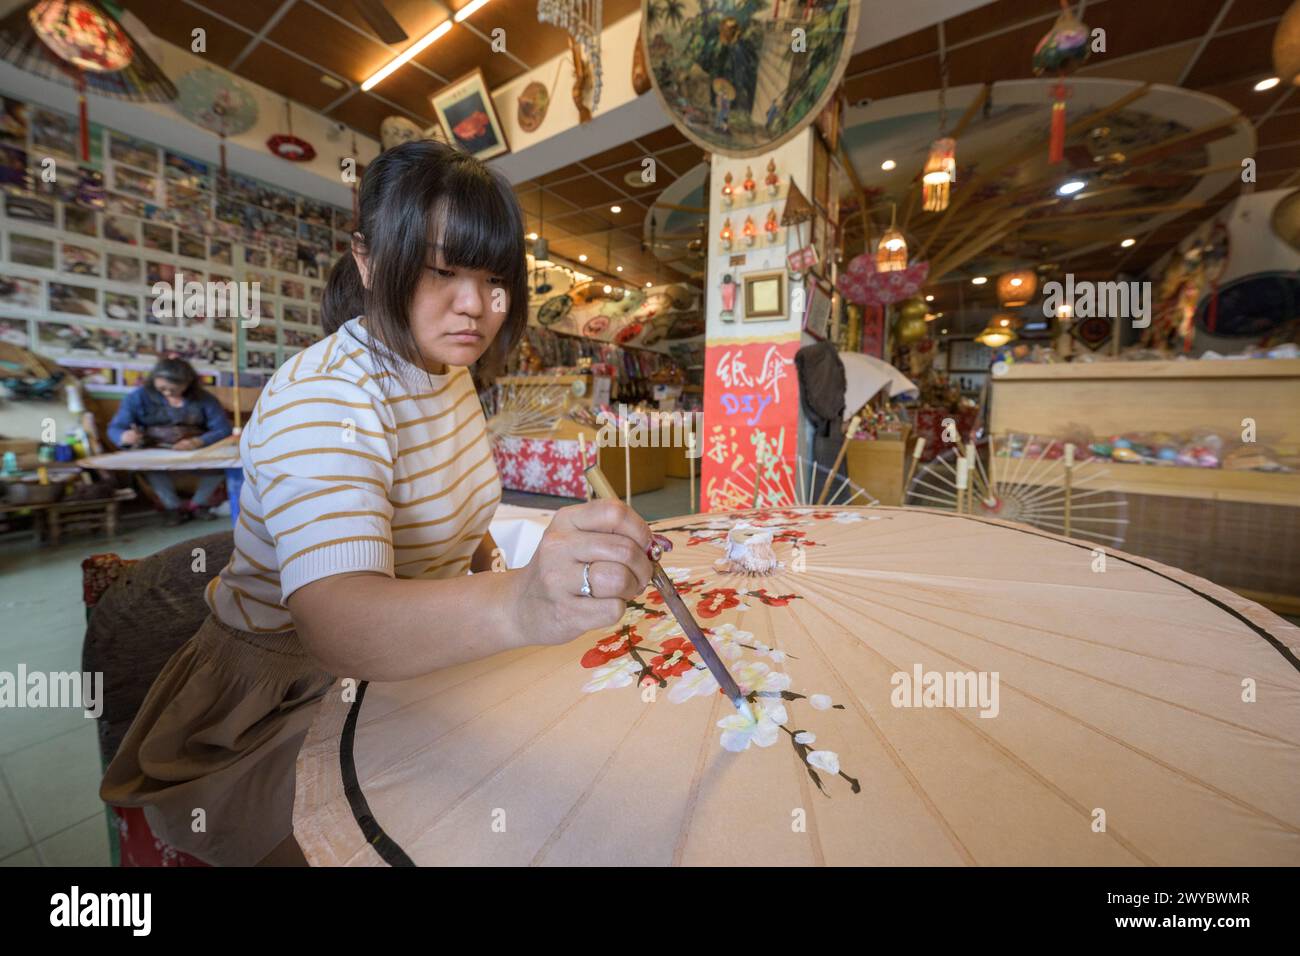 In a workshop, an artist decorates a paper umbrella with intricate floral designs Stock Photo